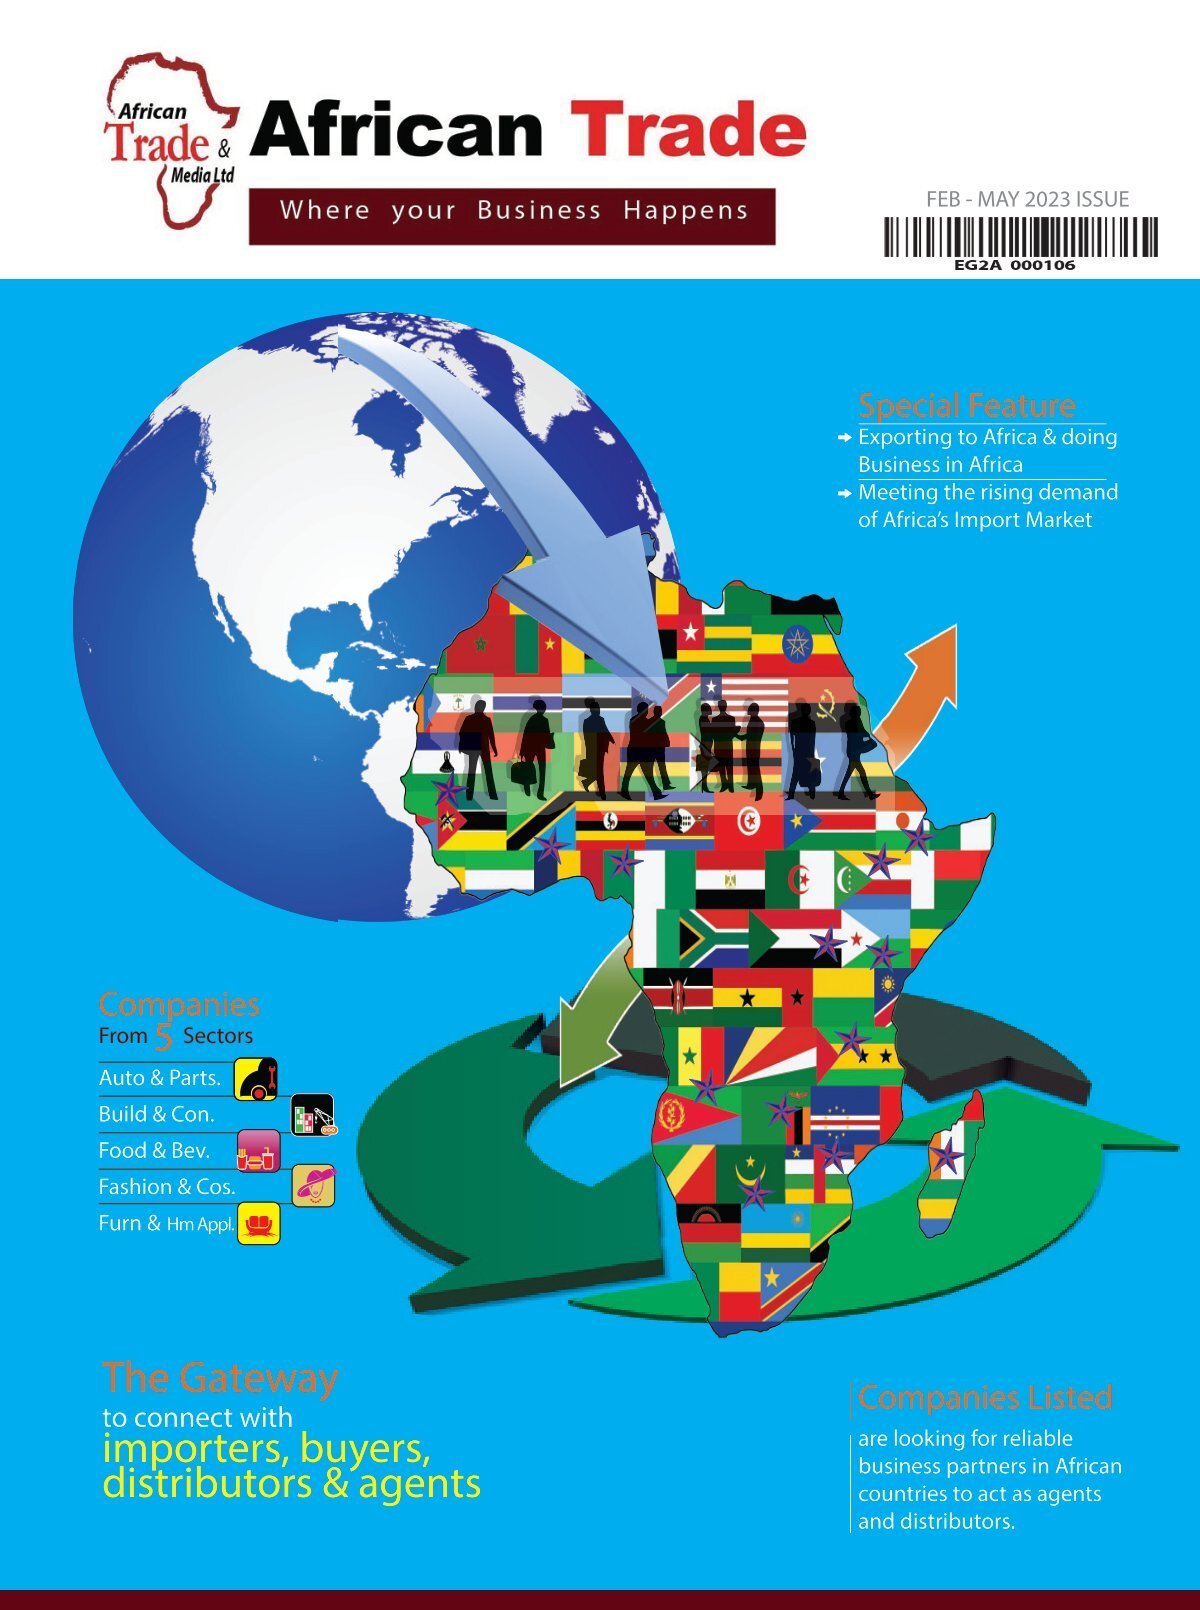 African Trade - Feb - May 2023 Issue